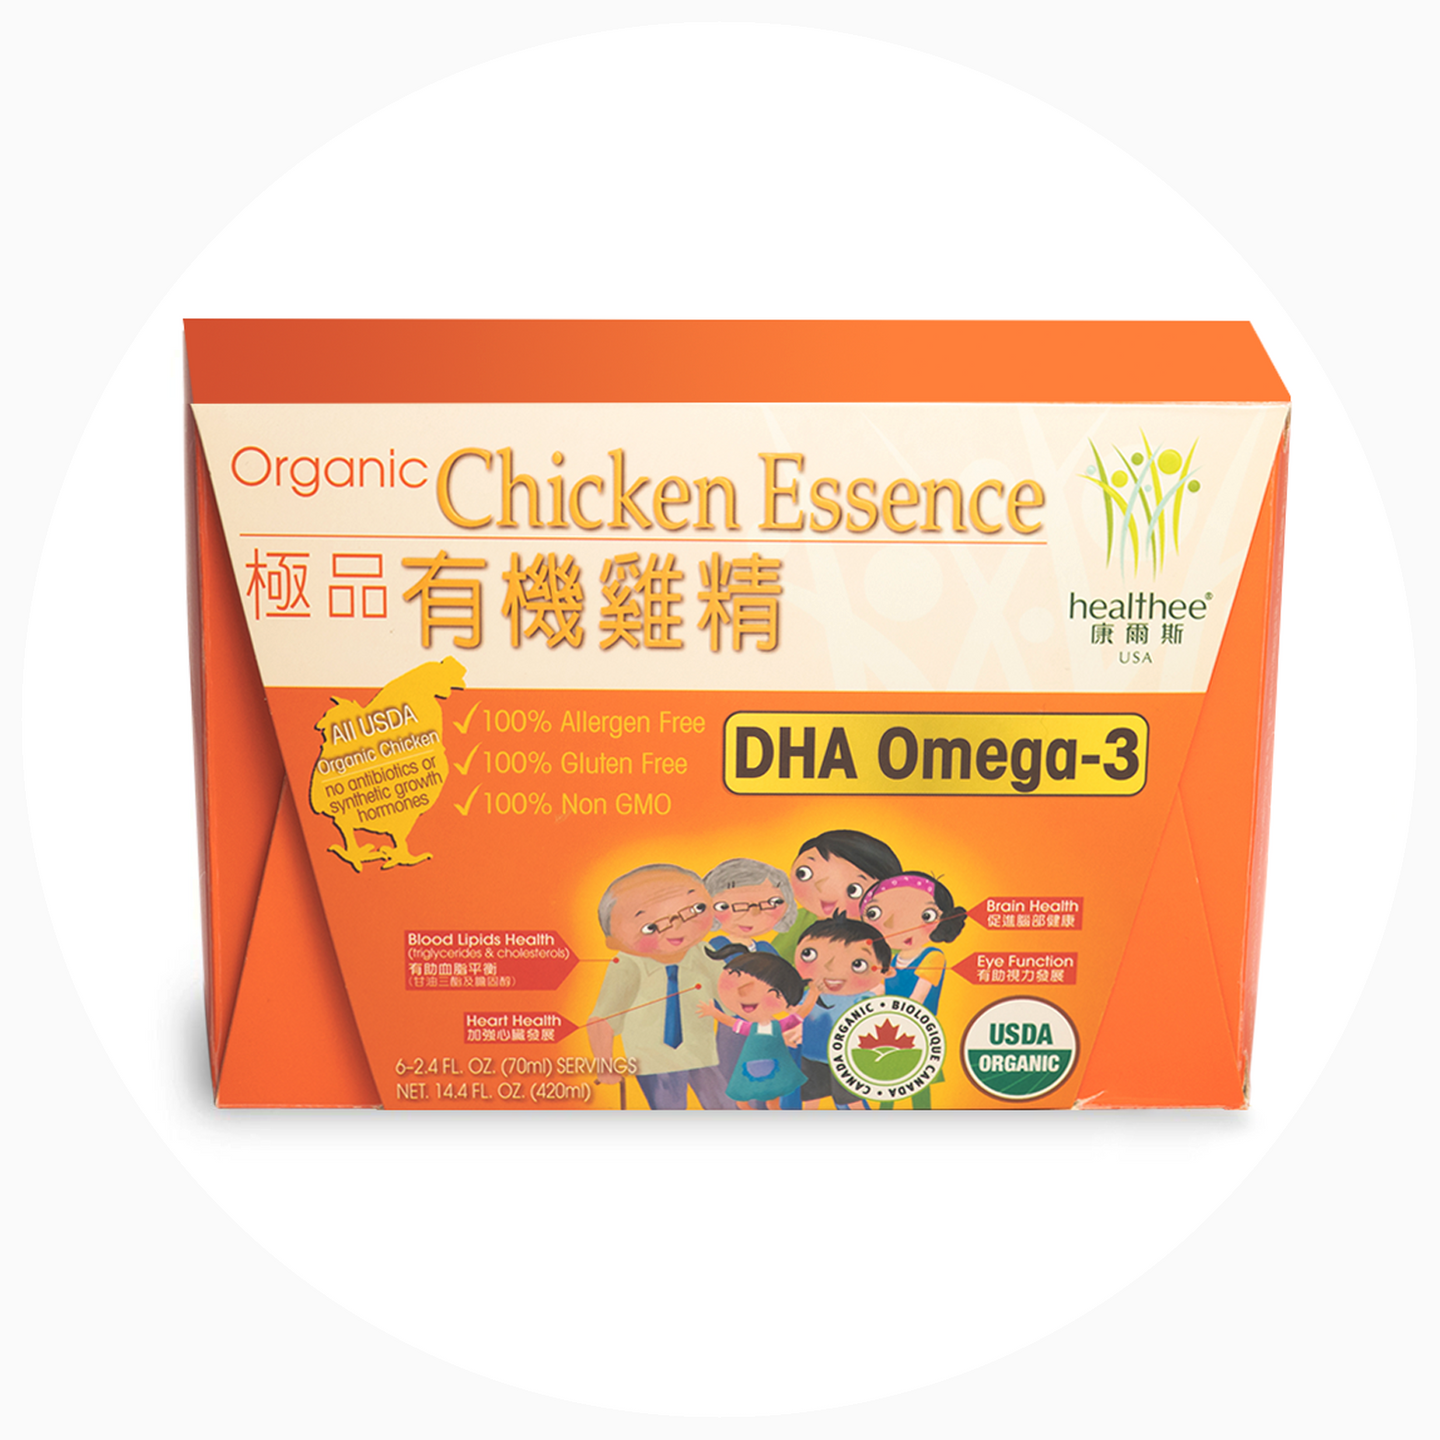 Healthee Organic Chicken Essence With DHA Omega 3 - 6 bottles x 70 ml (2.4 oz.)